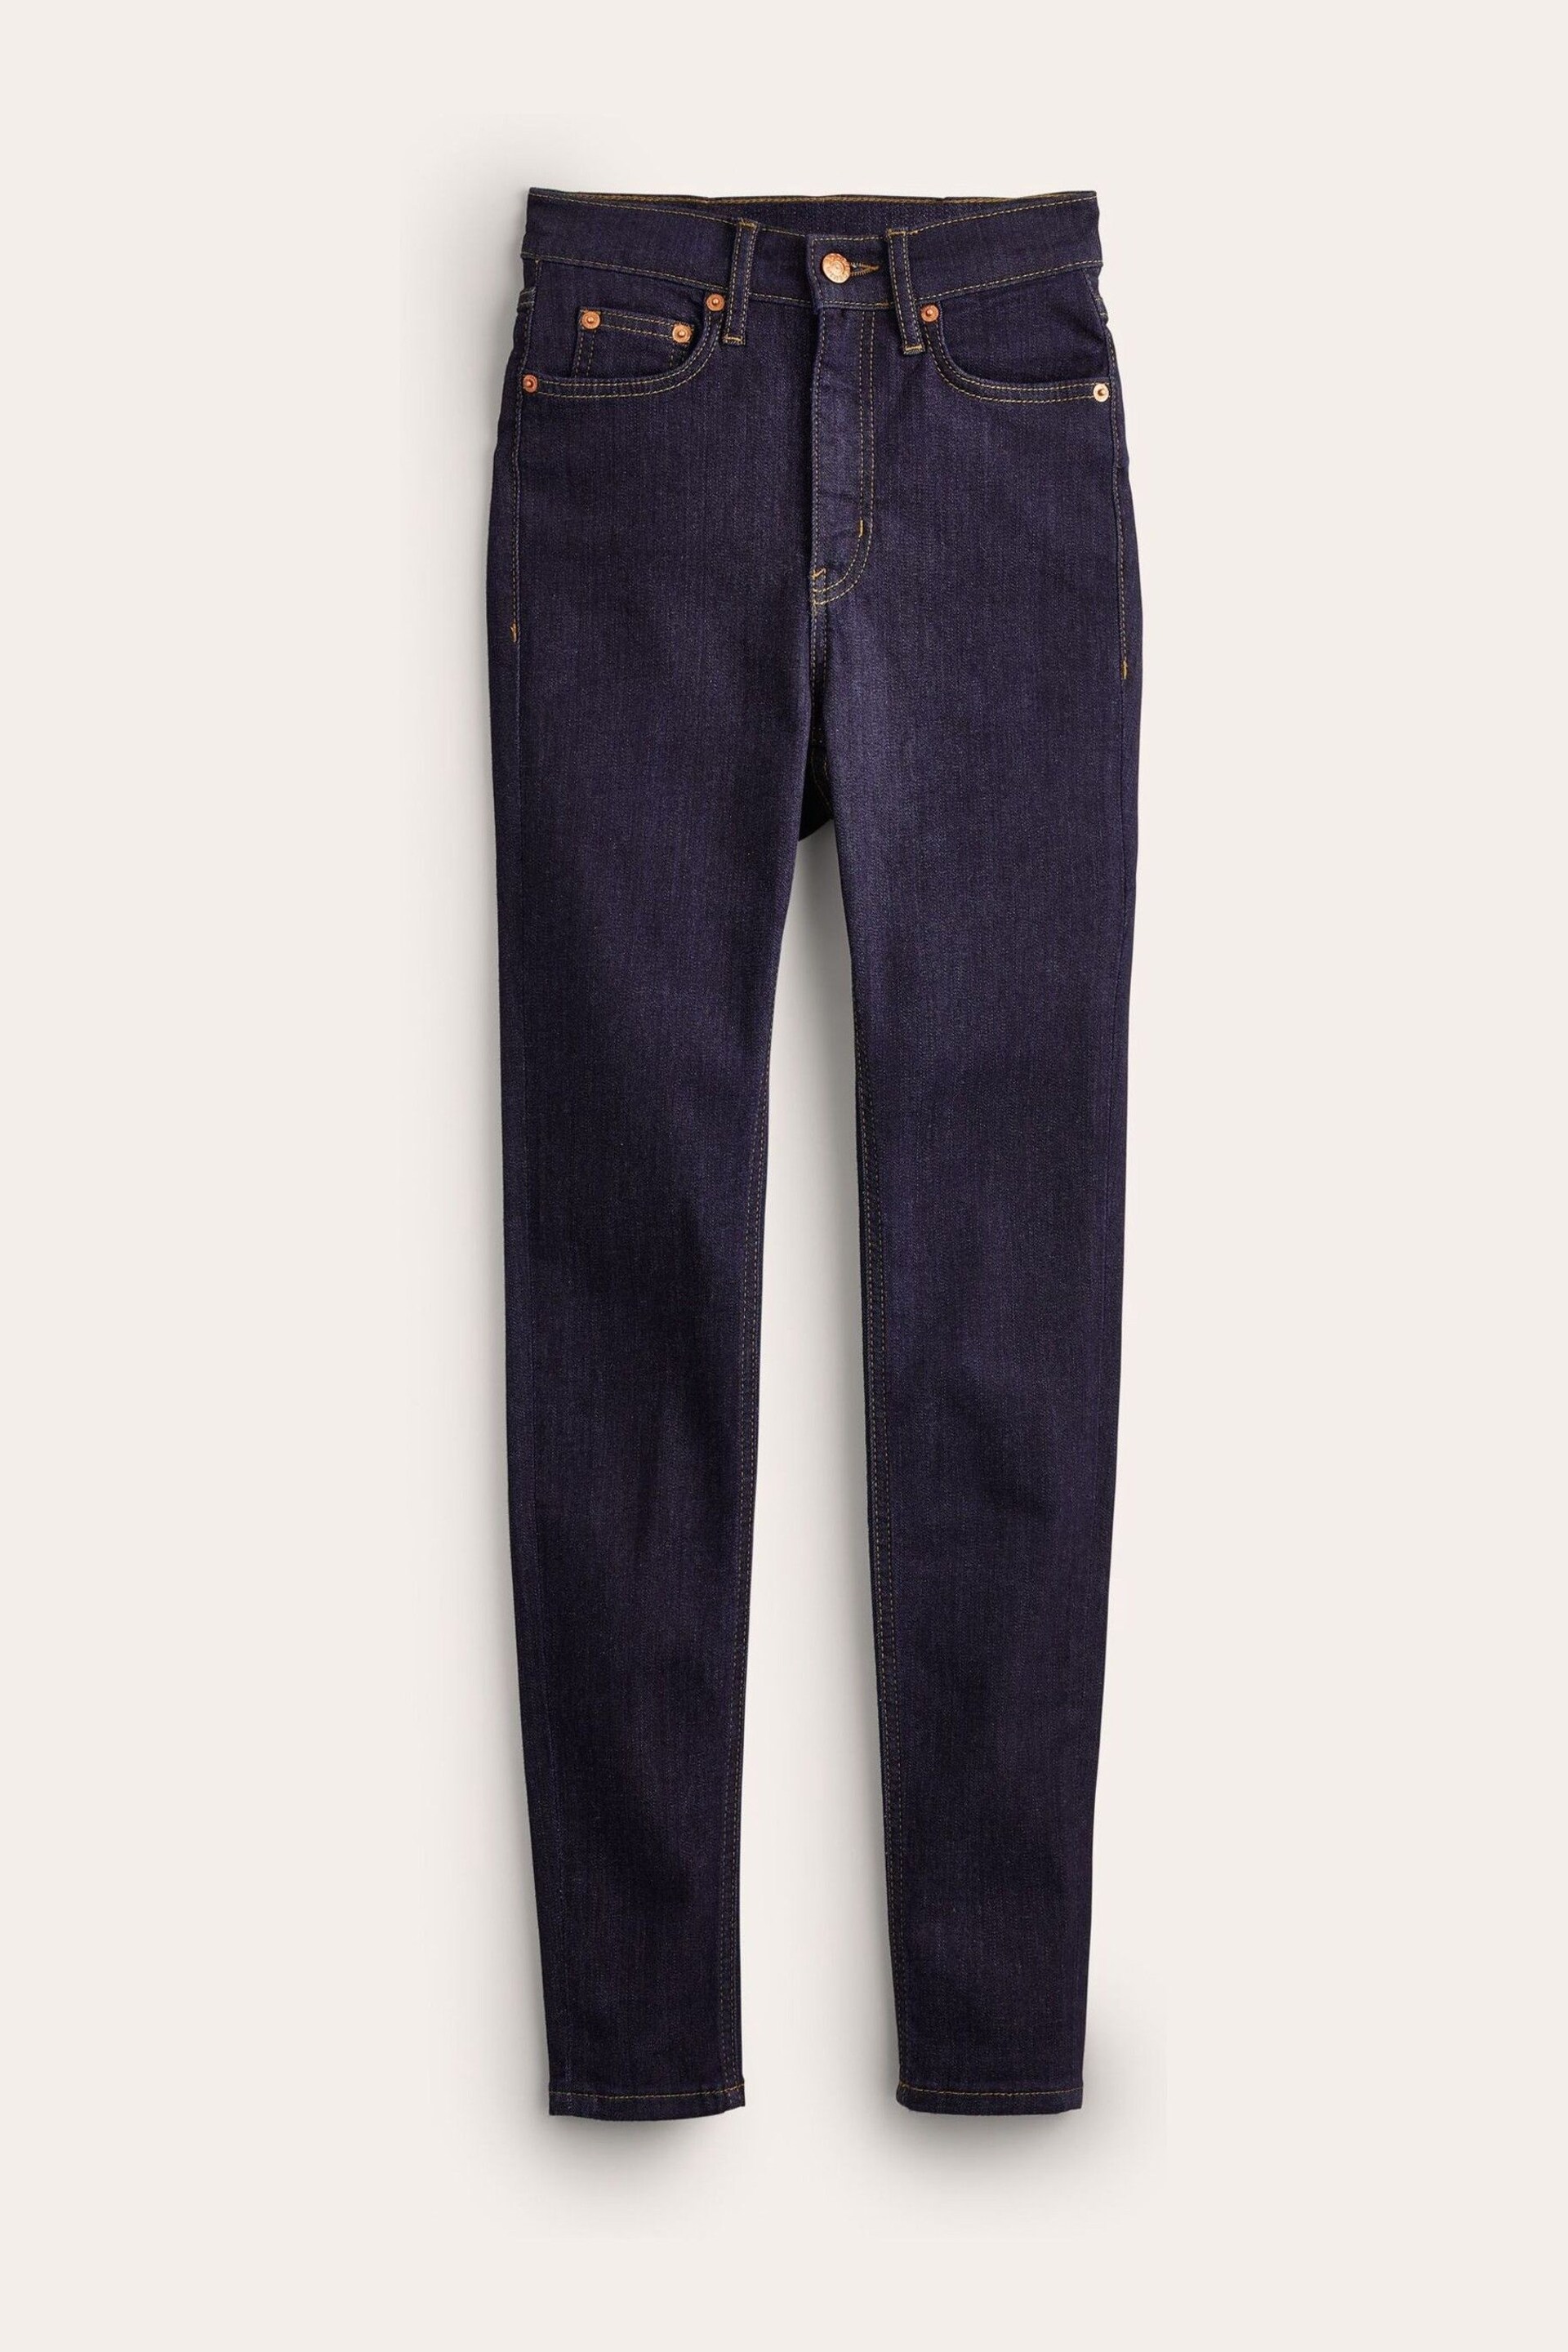 Boden Dark Blue Mid Rise Skinny Jeans - Image 6 of 6